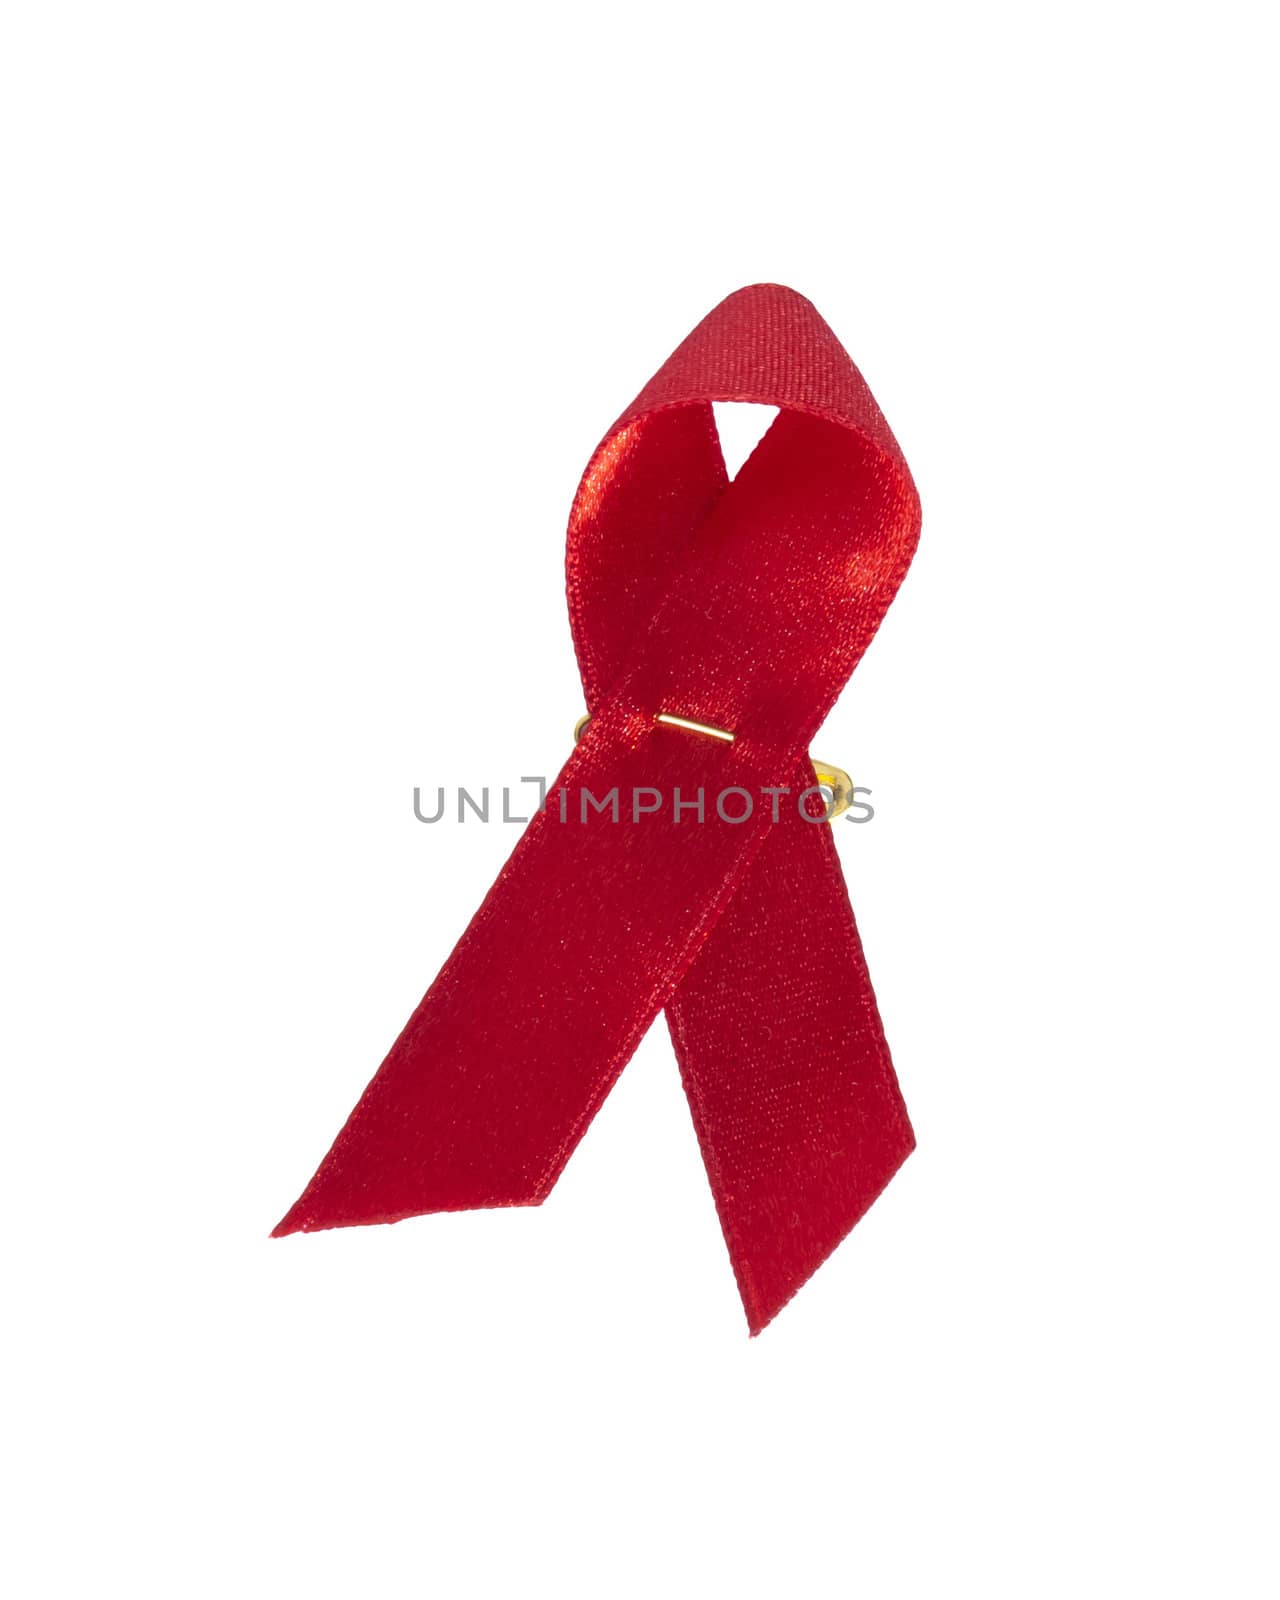 An image of a nice red ribbon